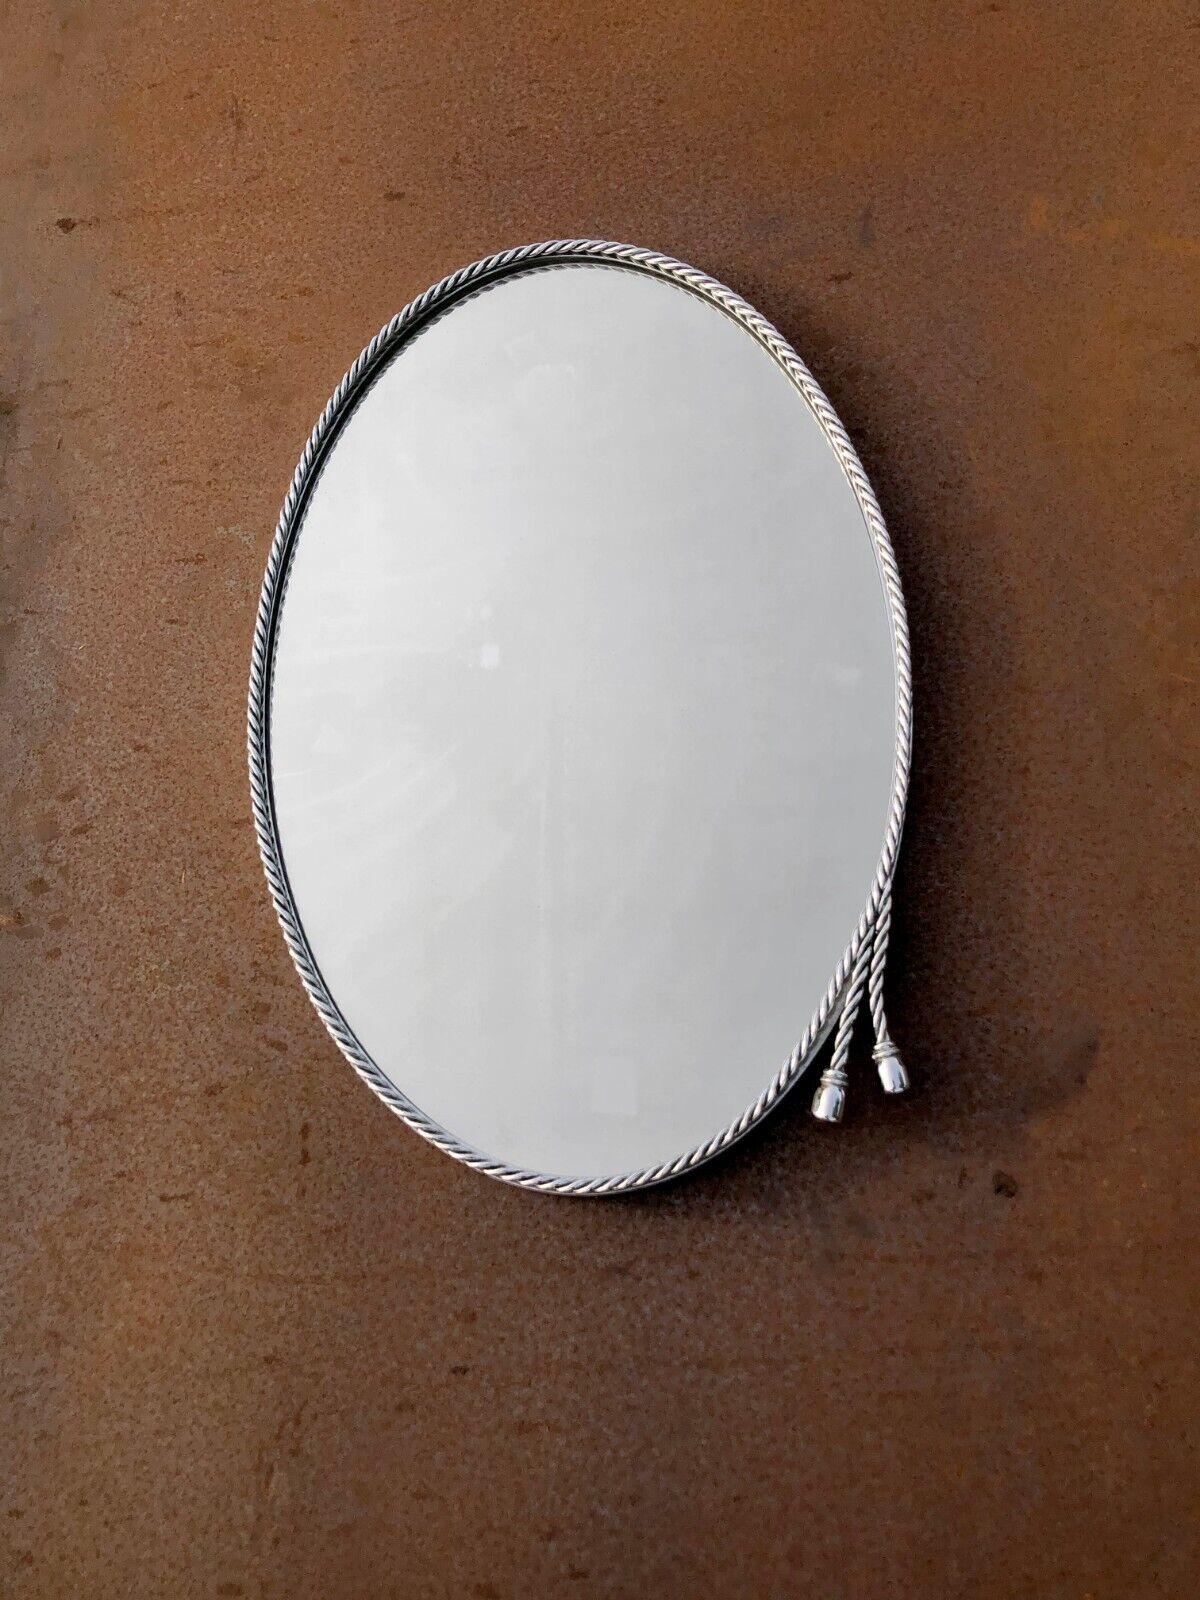 An elegant and luxurious oval wall mirror, Art-Deco, Neo-Classical, with a frame decorated with intertwined metal rope, decorated with a double trimmings on the lower right side, in bronze or silver-plated brass, in the spirit of Maria Pergay, by